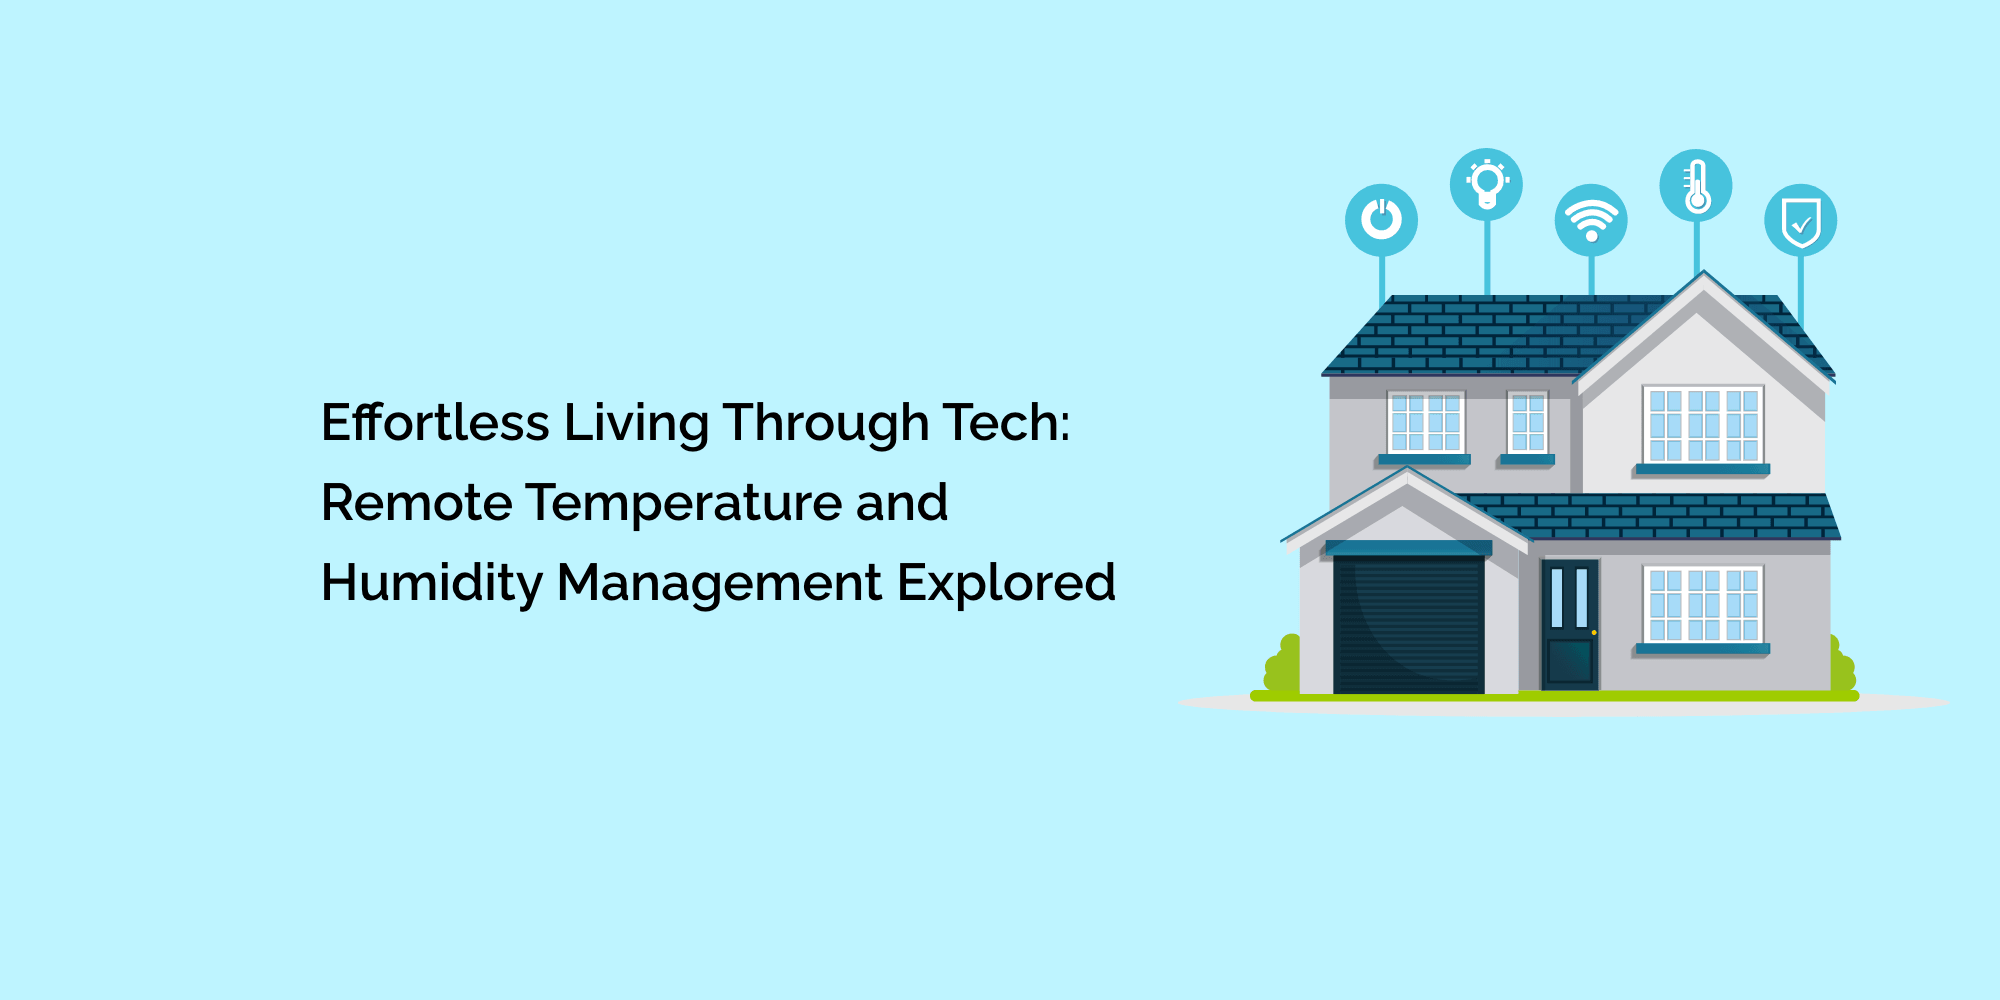 Effortless Living Through Tech: Remote Temperature and Humidity Management Explored